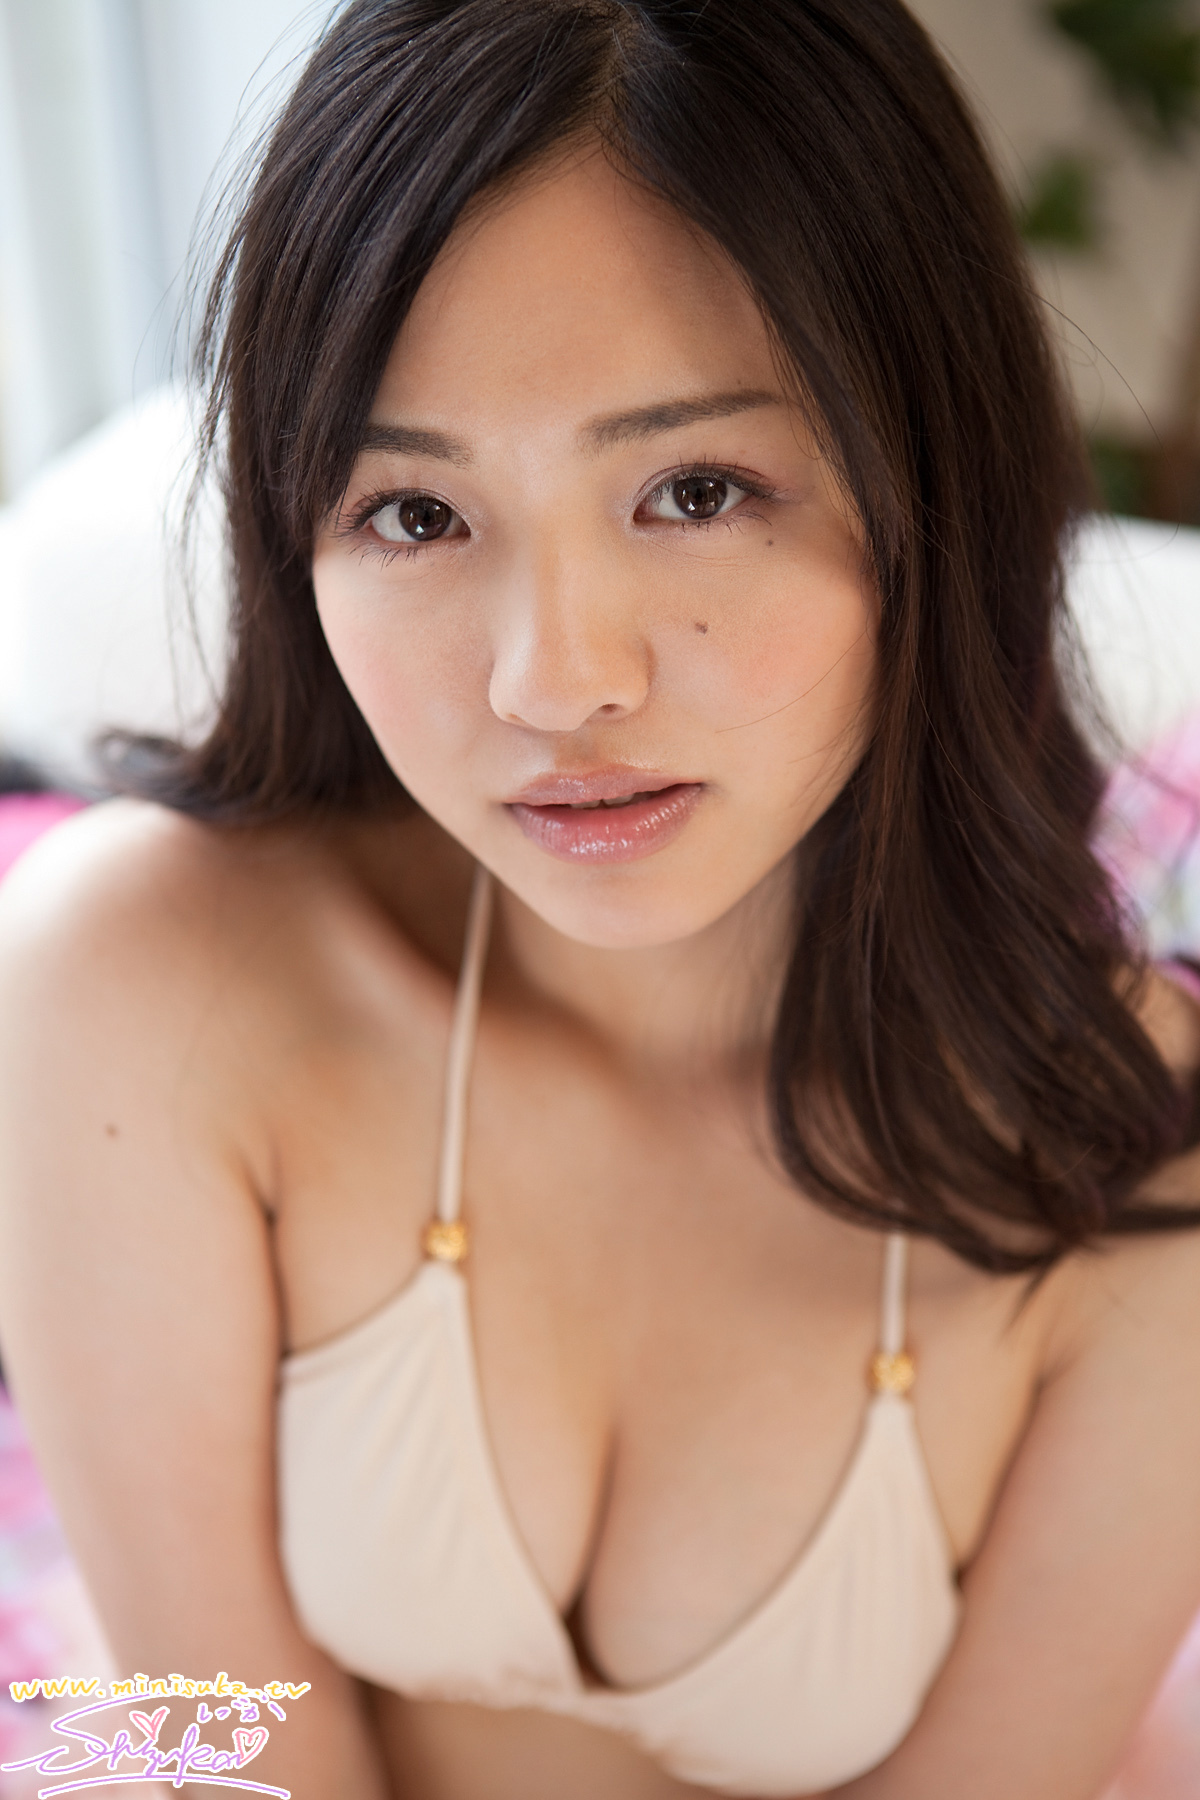 She is a member of the women's College of photography Minisuka. TV )